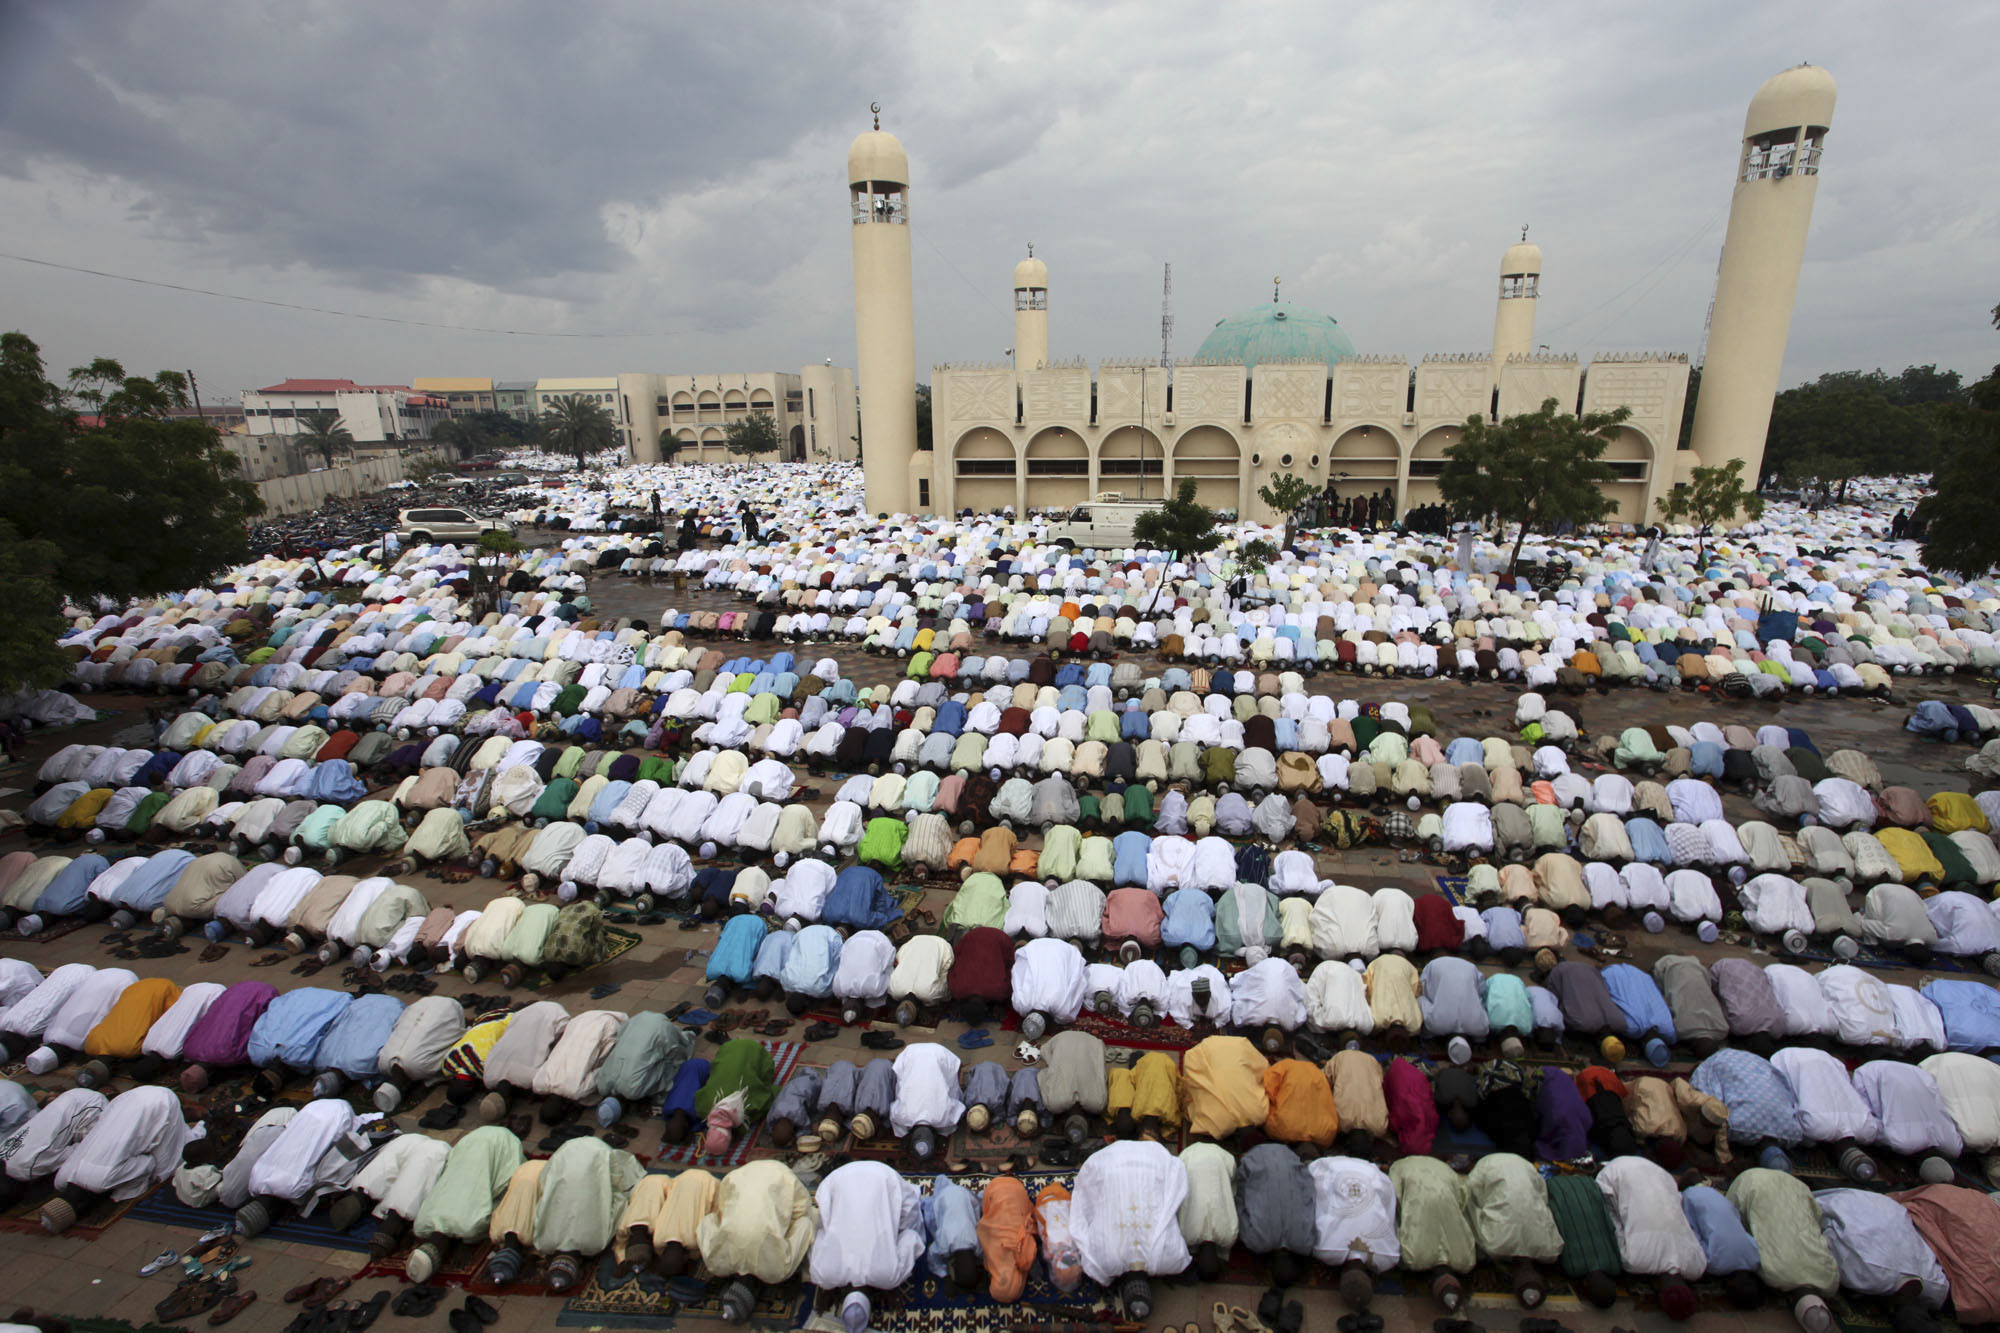 Muslims pray at the Kofar Mata central mosque to mark the end of the holy month of Ramadan in Nigeria's northern city of Kano